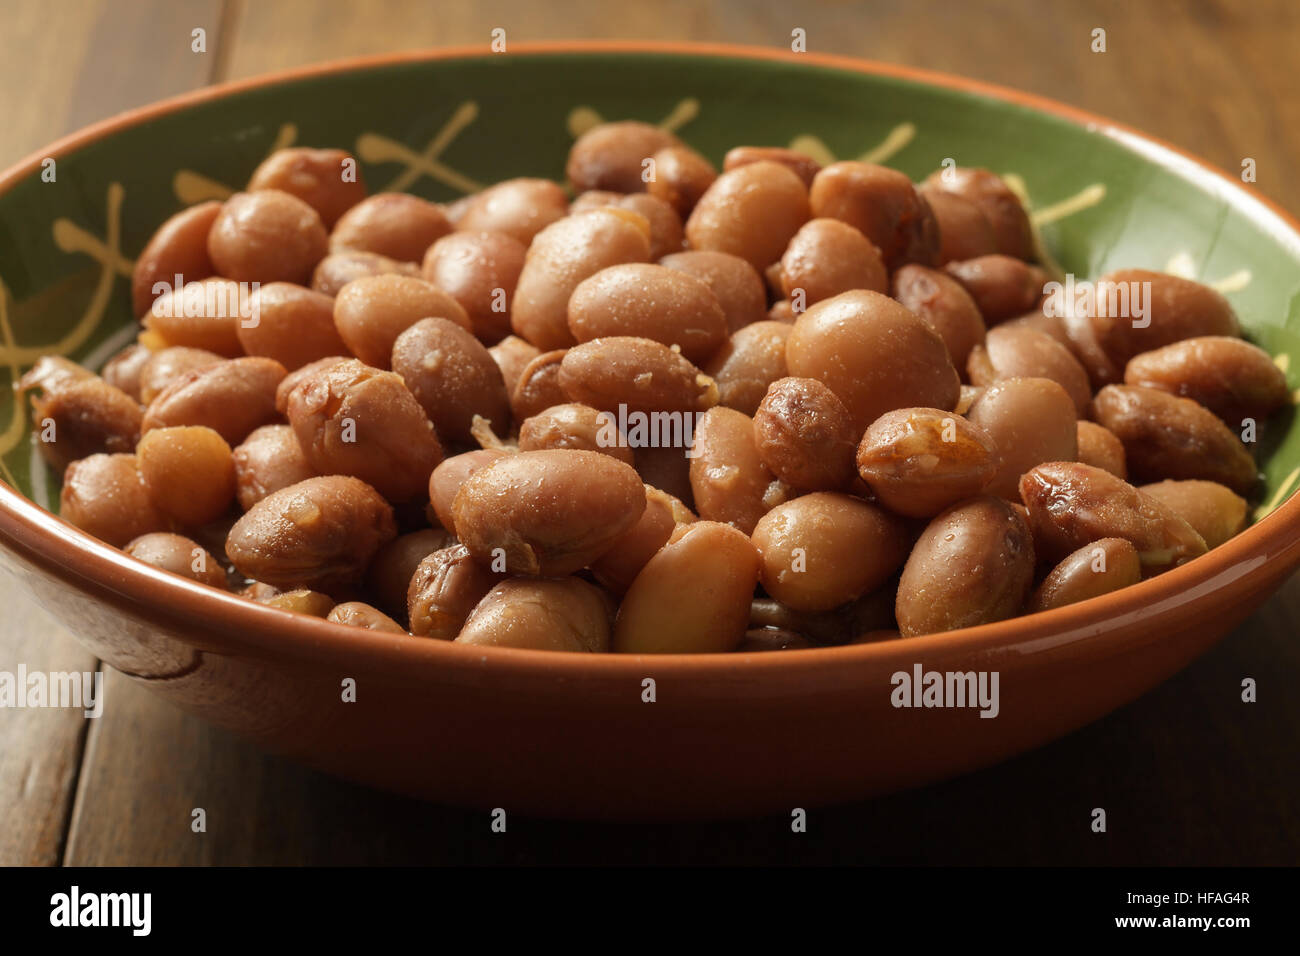 Pinto beans cooked Stock Photo